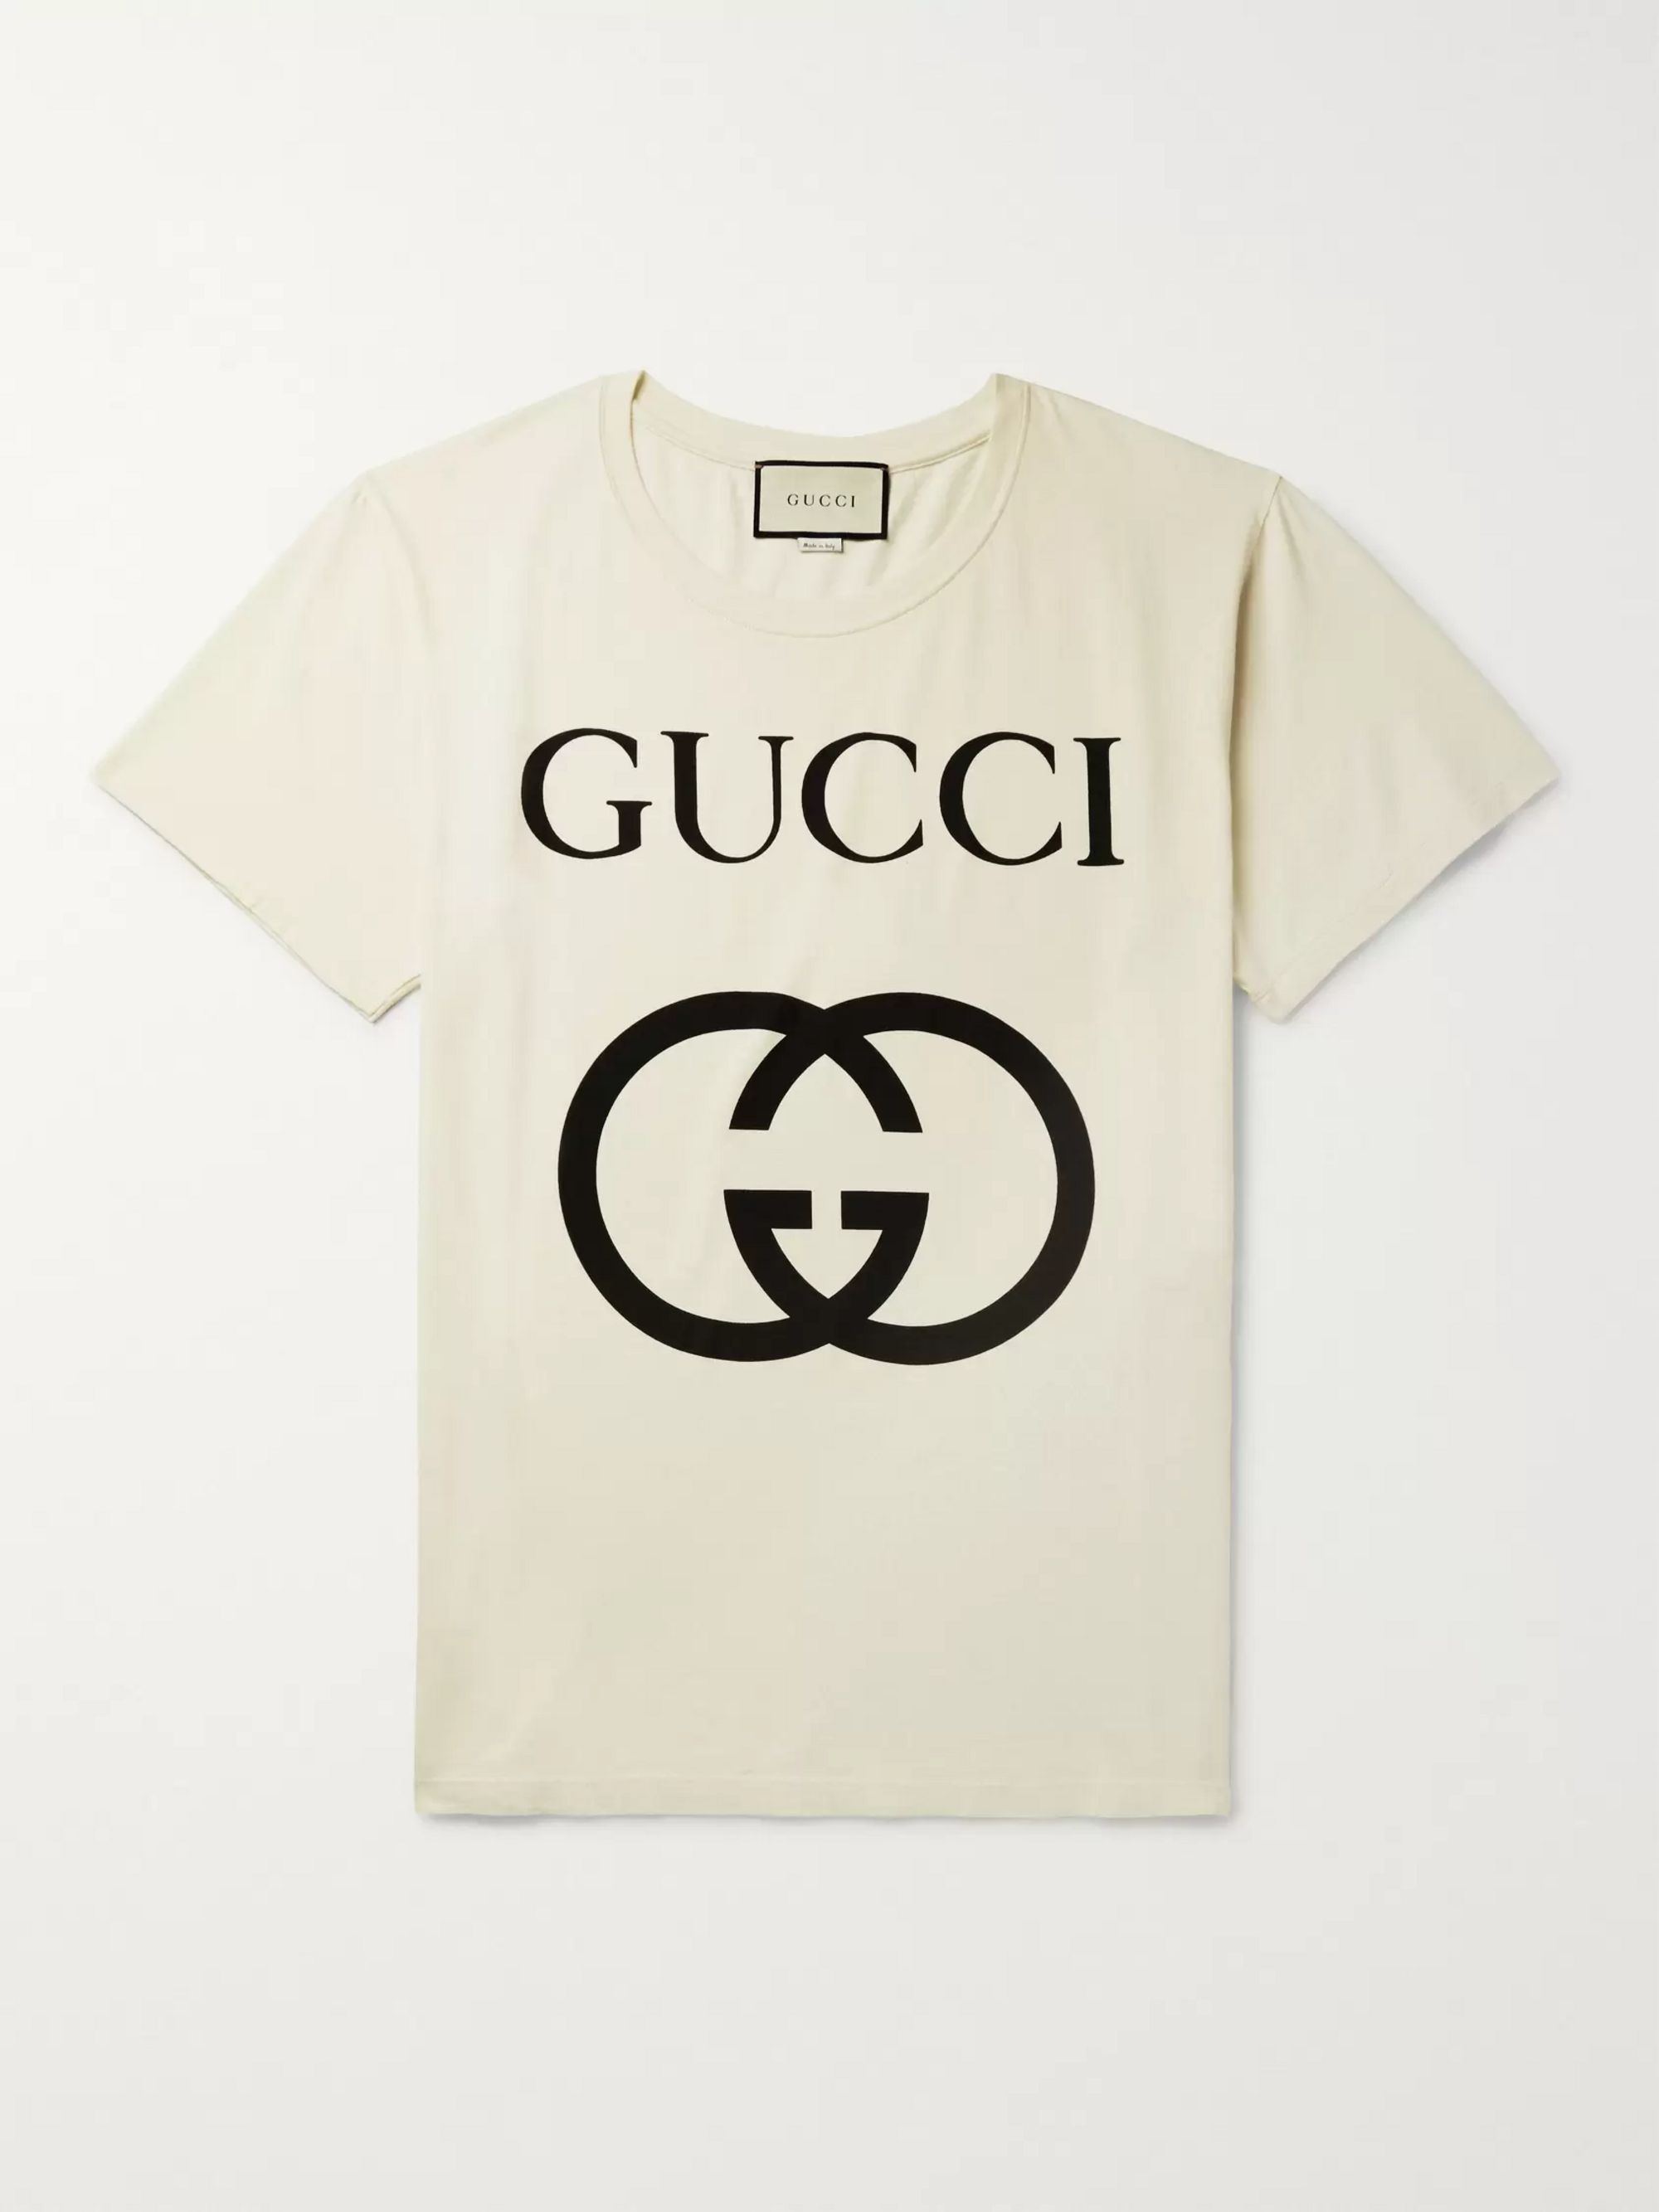 Gucci T Shirt - Gucci GG Logo Print T-shirt in Red for Men - Lyst _ See ...